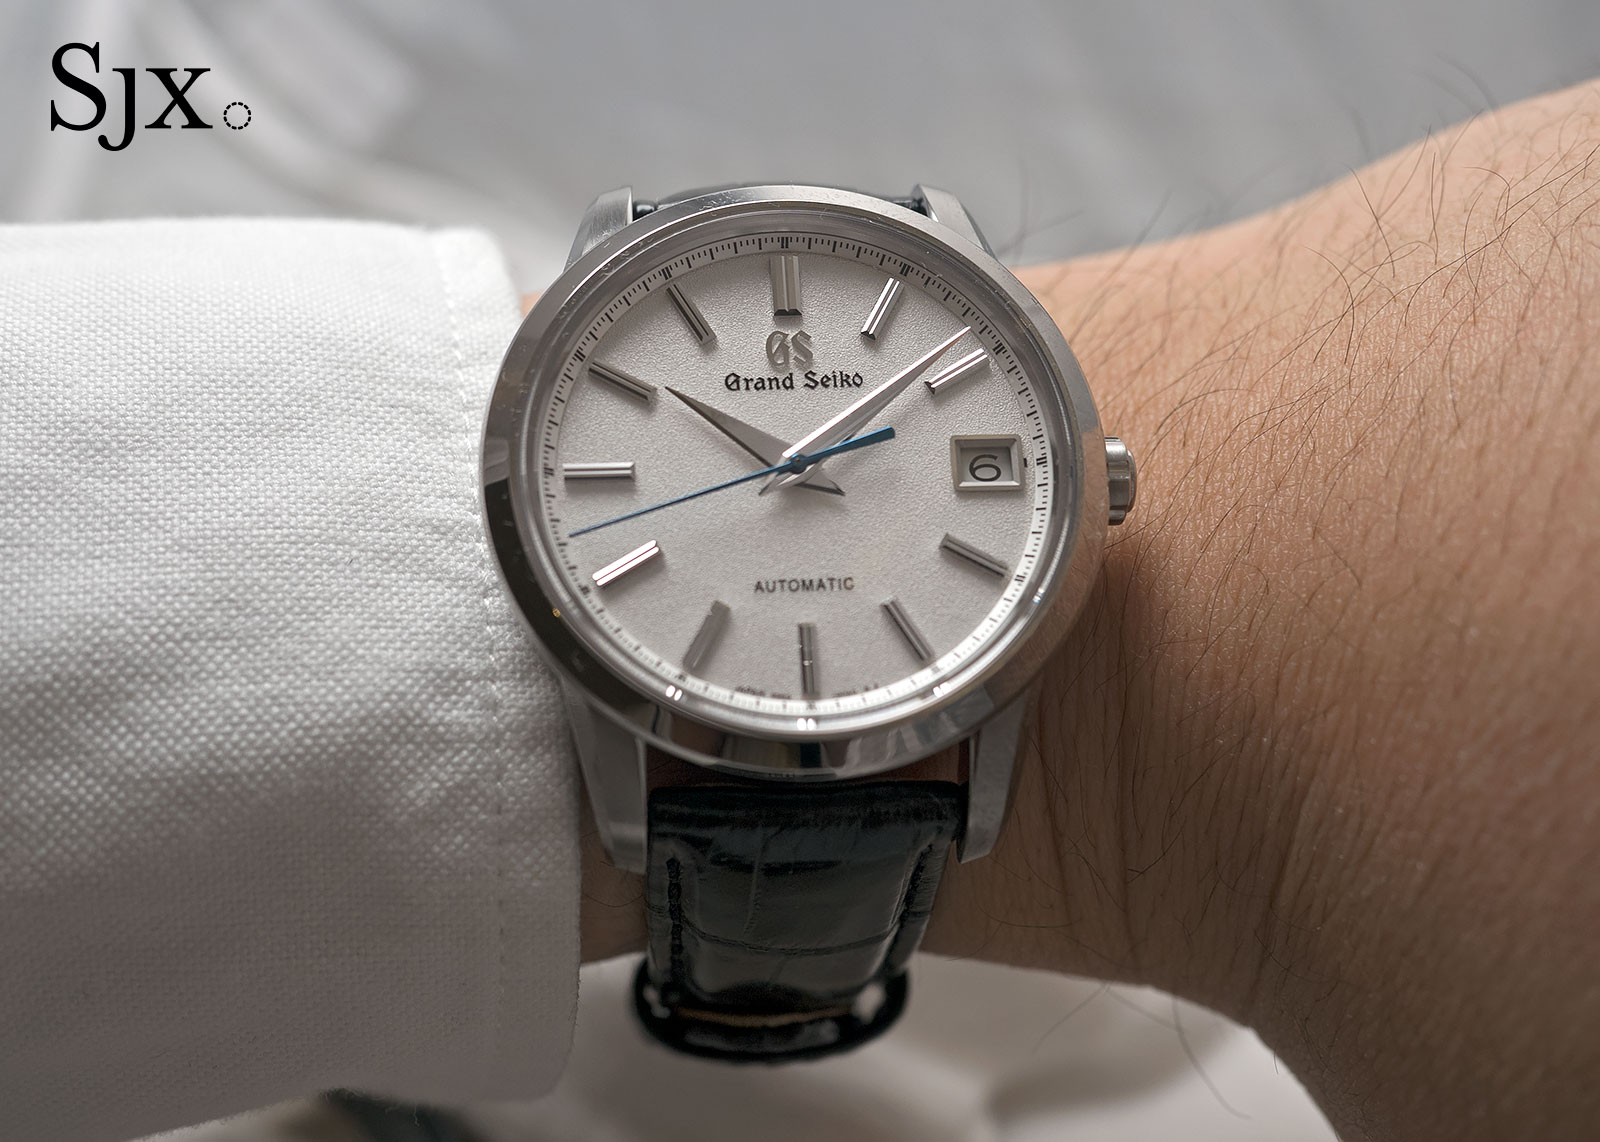 Hands-On with the Grand Seiko SBGR305, a Modern Take on the First GS of  1960 | SJX Watches